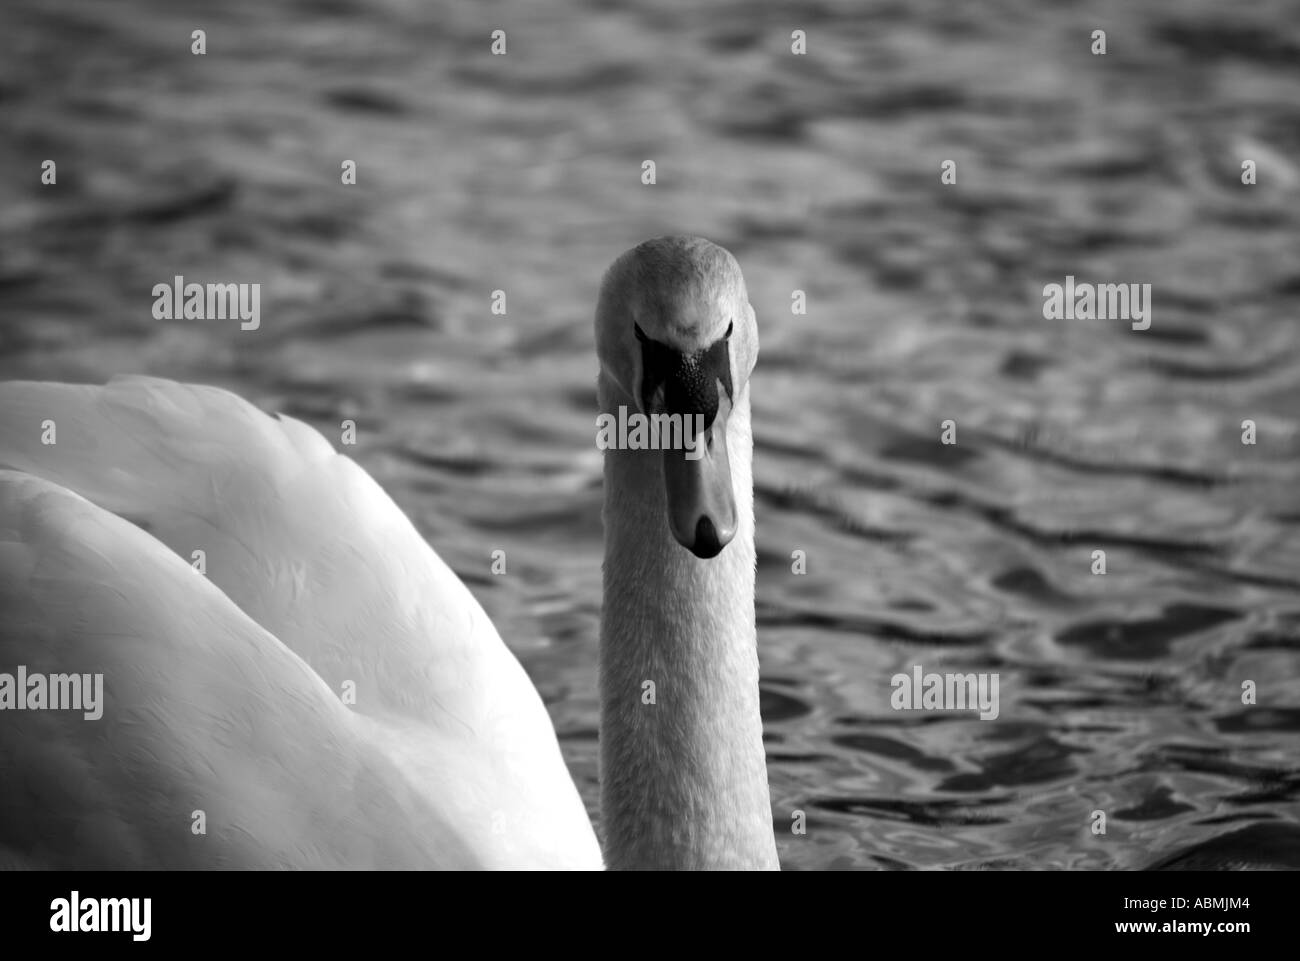 White swan facing forward in black and white Stock Photo